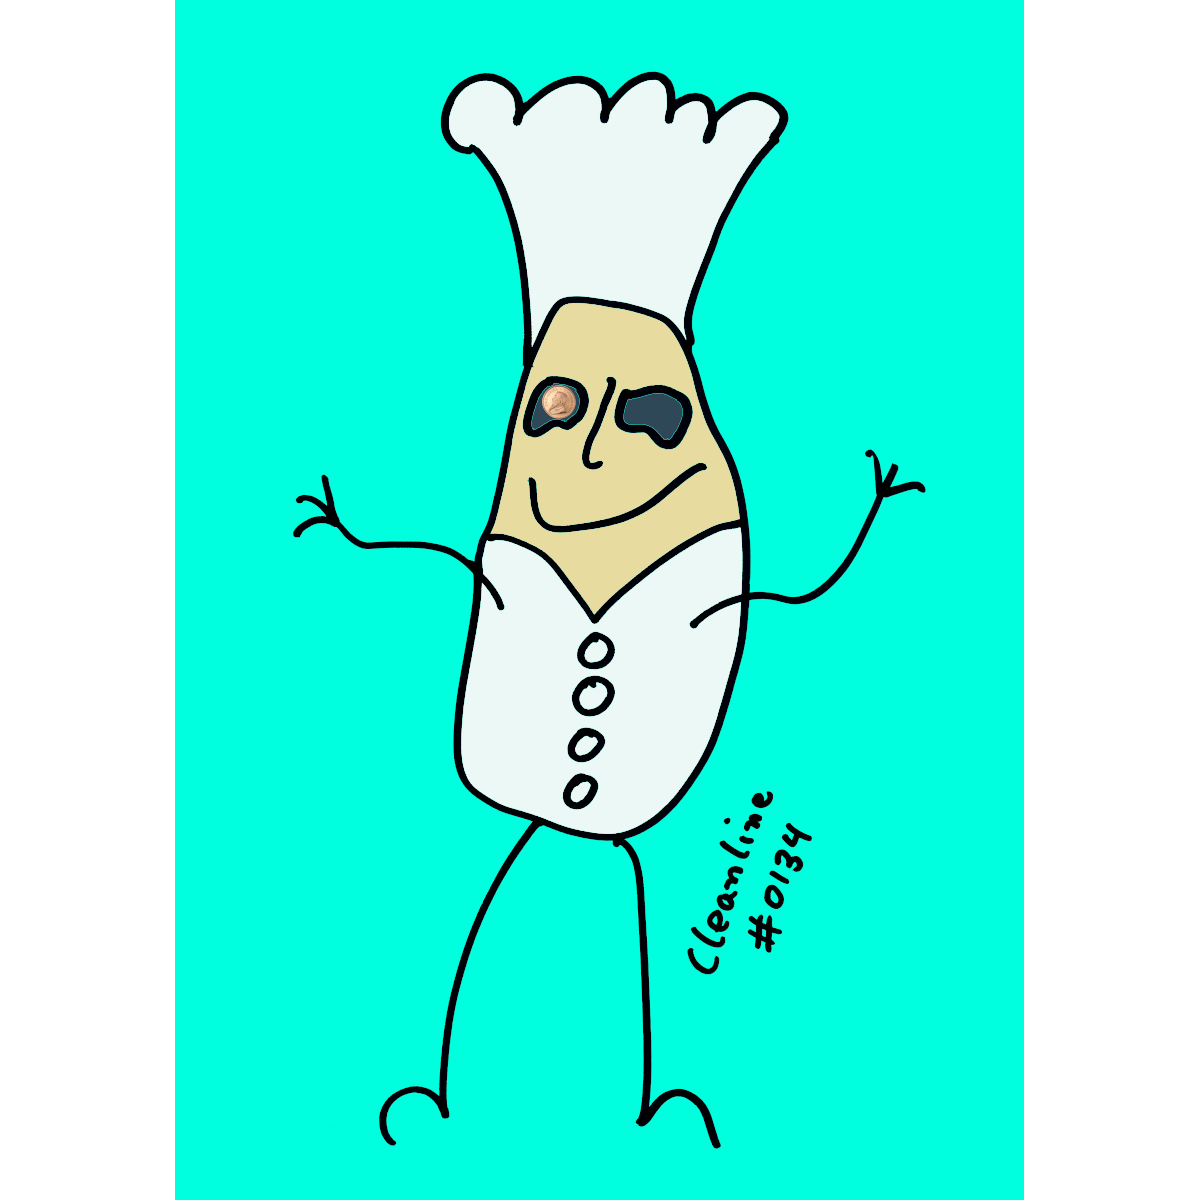 #0134 - lucky chef - print: 841 mm x 1189 mm